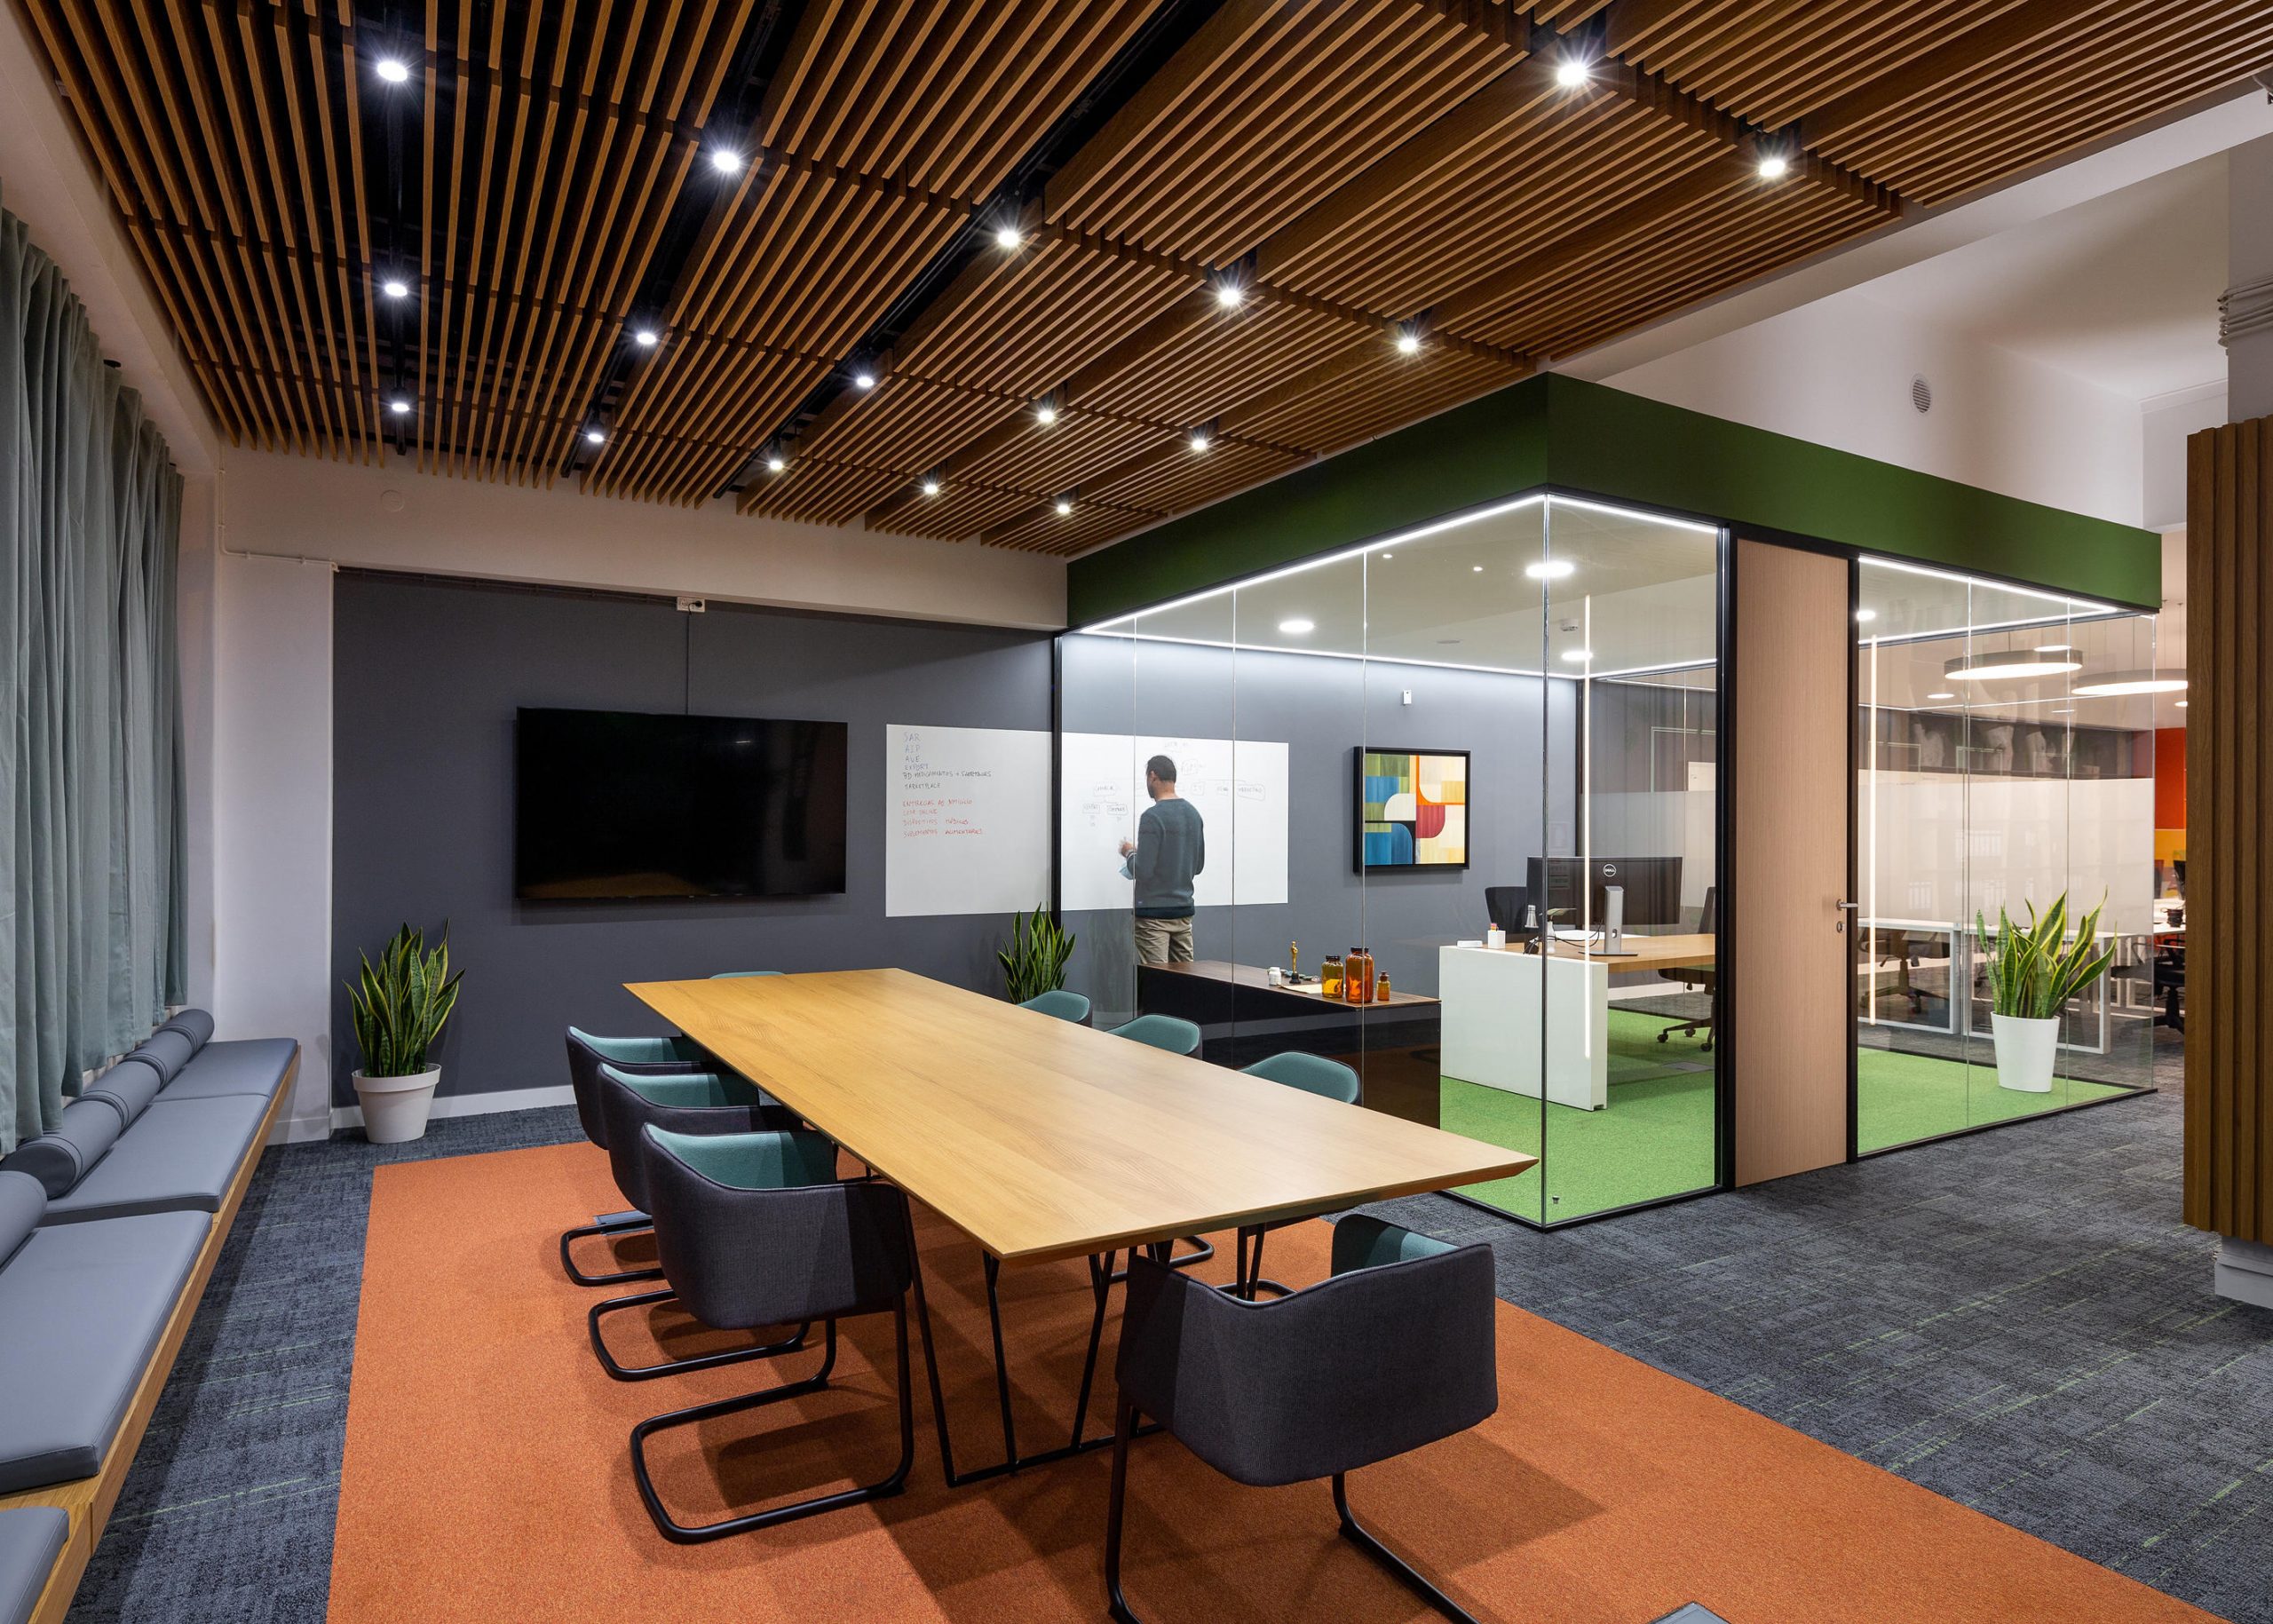 COLOUR IN OFFICE SPACES